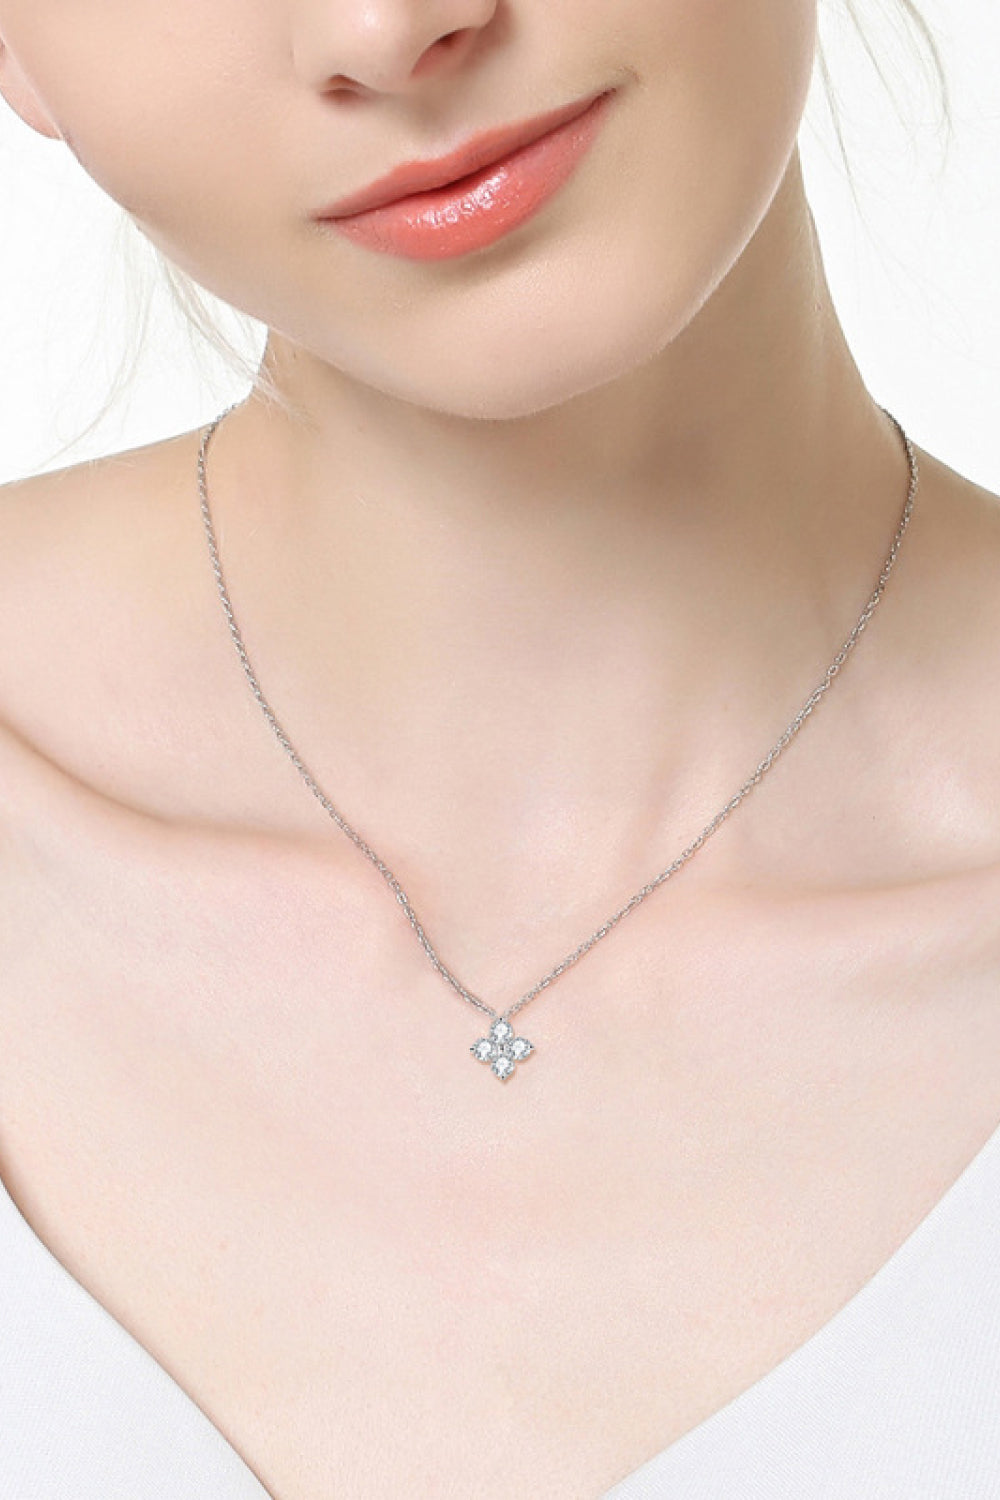 Moissanite Four Leaf Clover Pendant Necklace-Necklaces-Inspired by Justeen-Women's Clothing Boutique in Chicago, Illinois